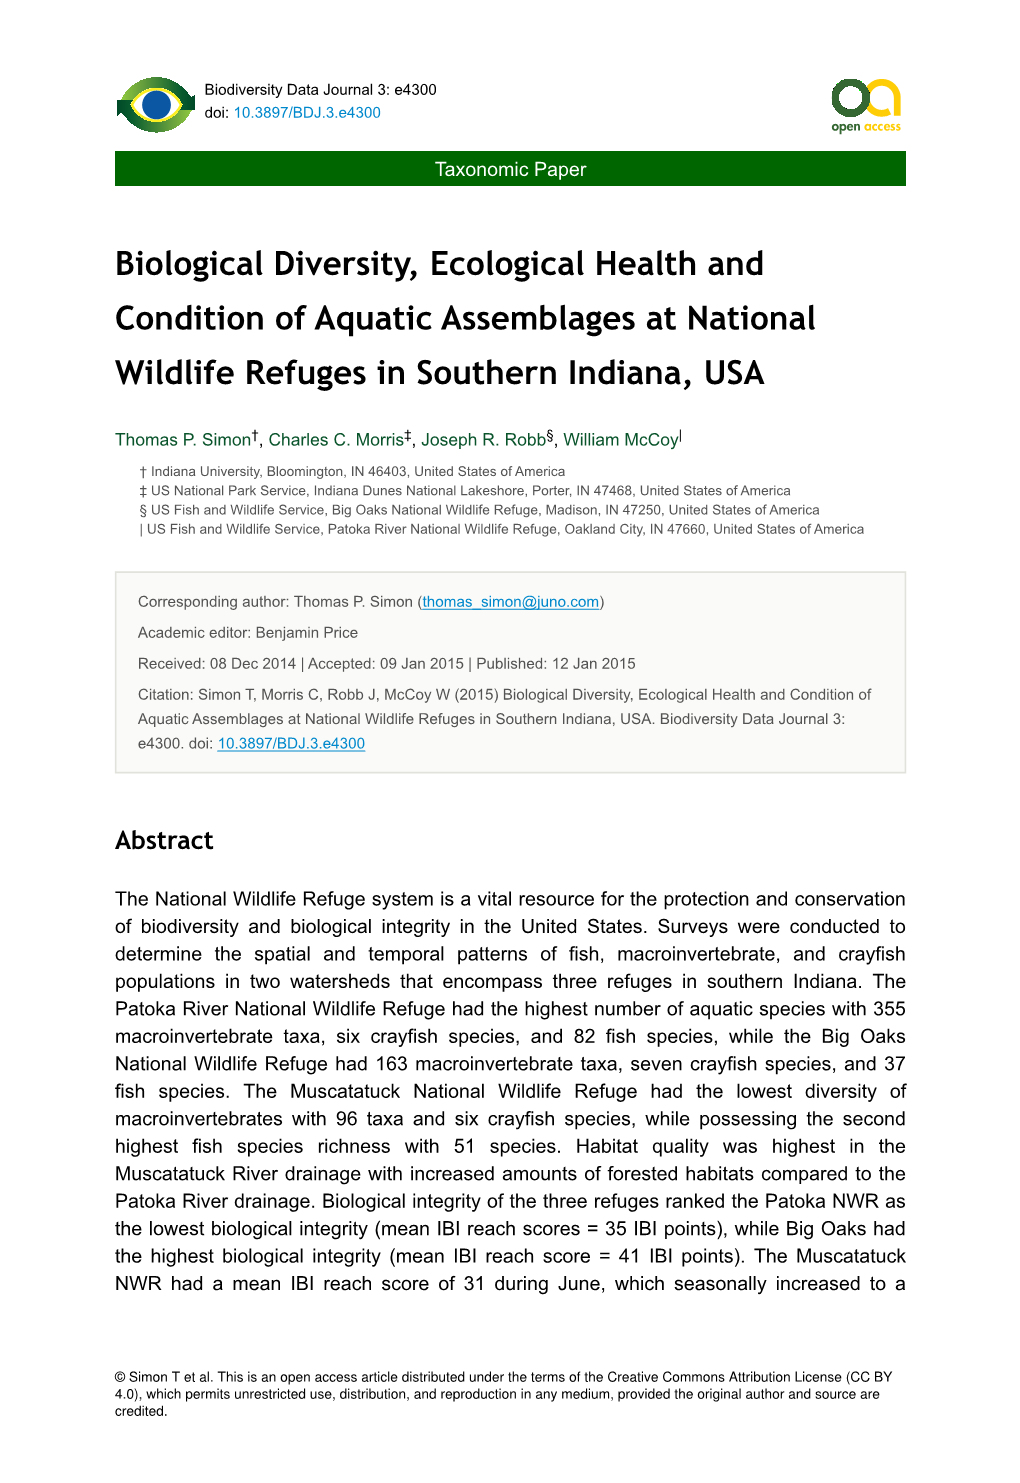 Biological Diversity, Ecological Health and Condition of Aquatic Assemblages at National Wildlife Refuges in Southern Indiana, USA